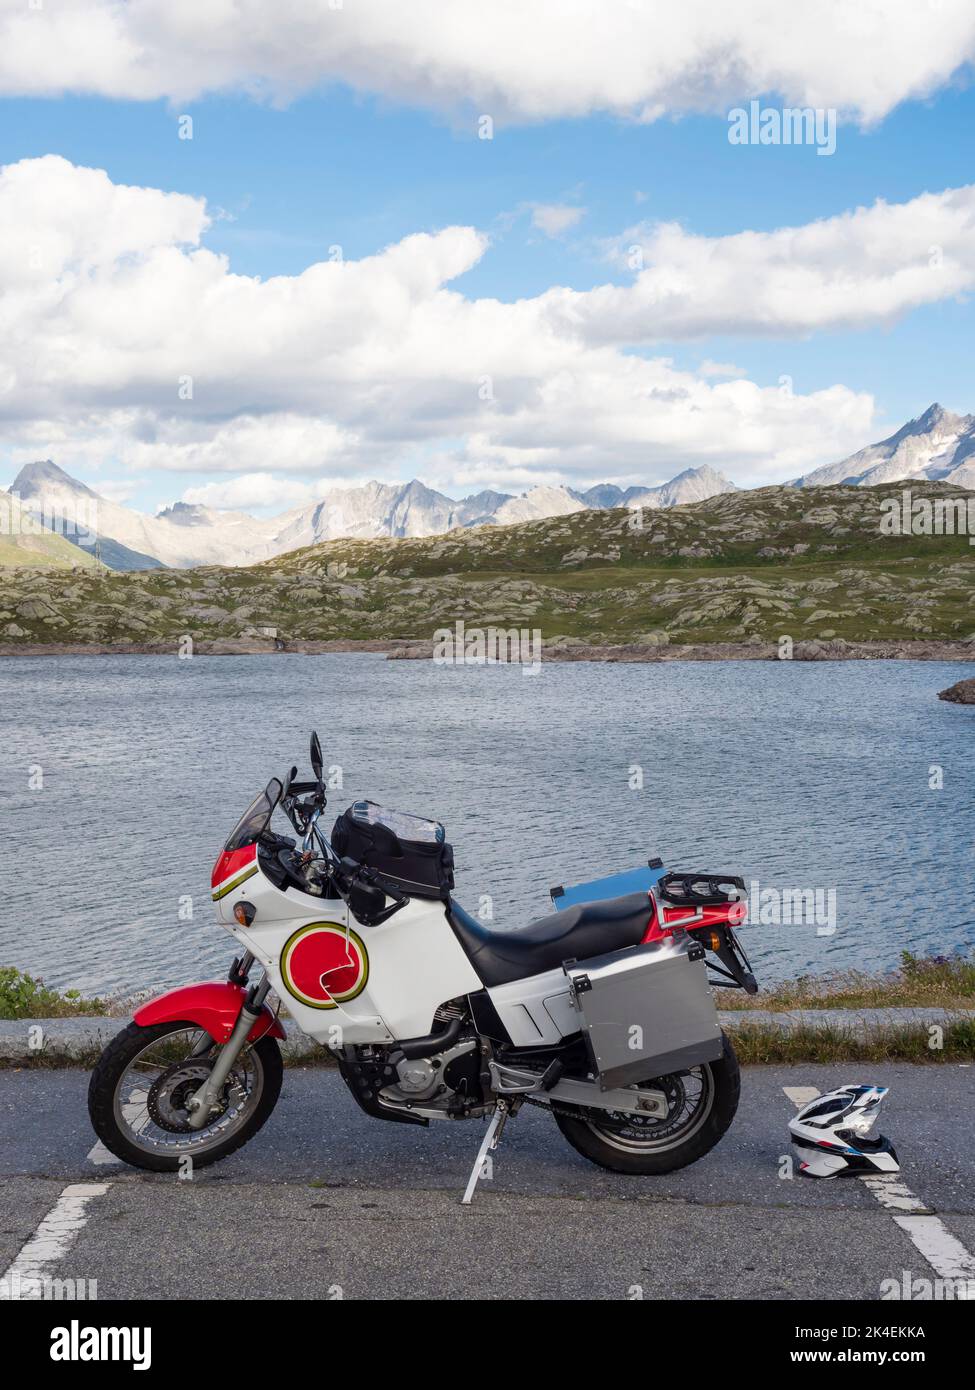 An adventure motorcycle parked at Grimsel pass, a mountain pass in the Swiss alps. Stock Photo